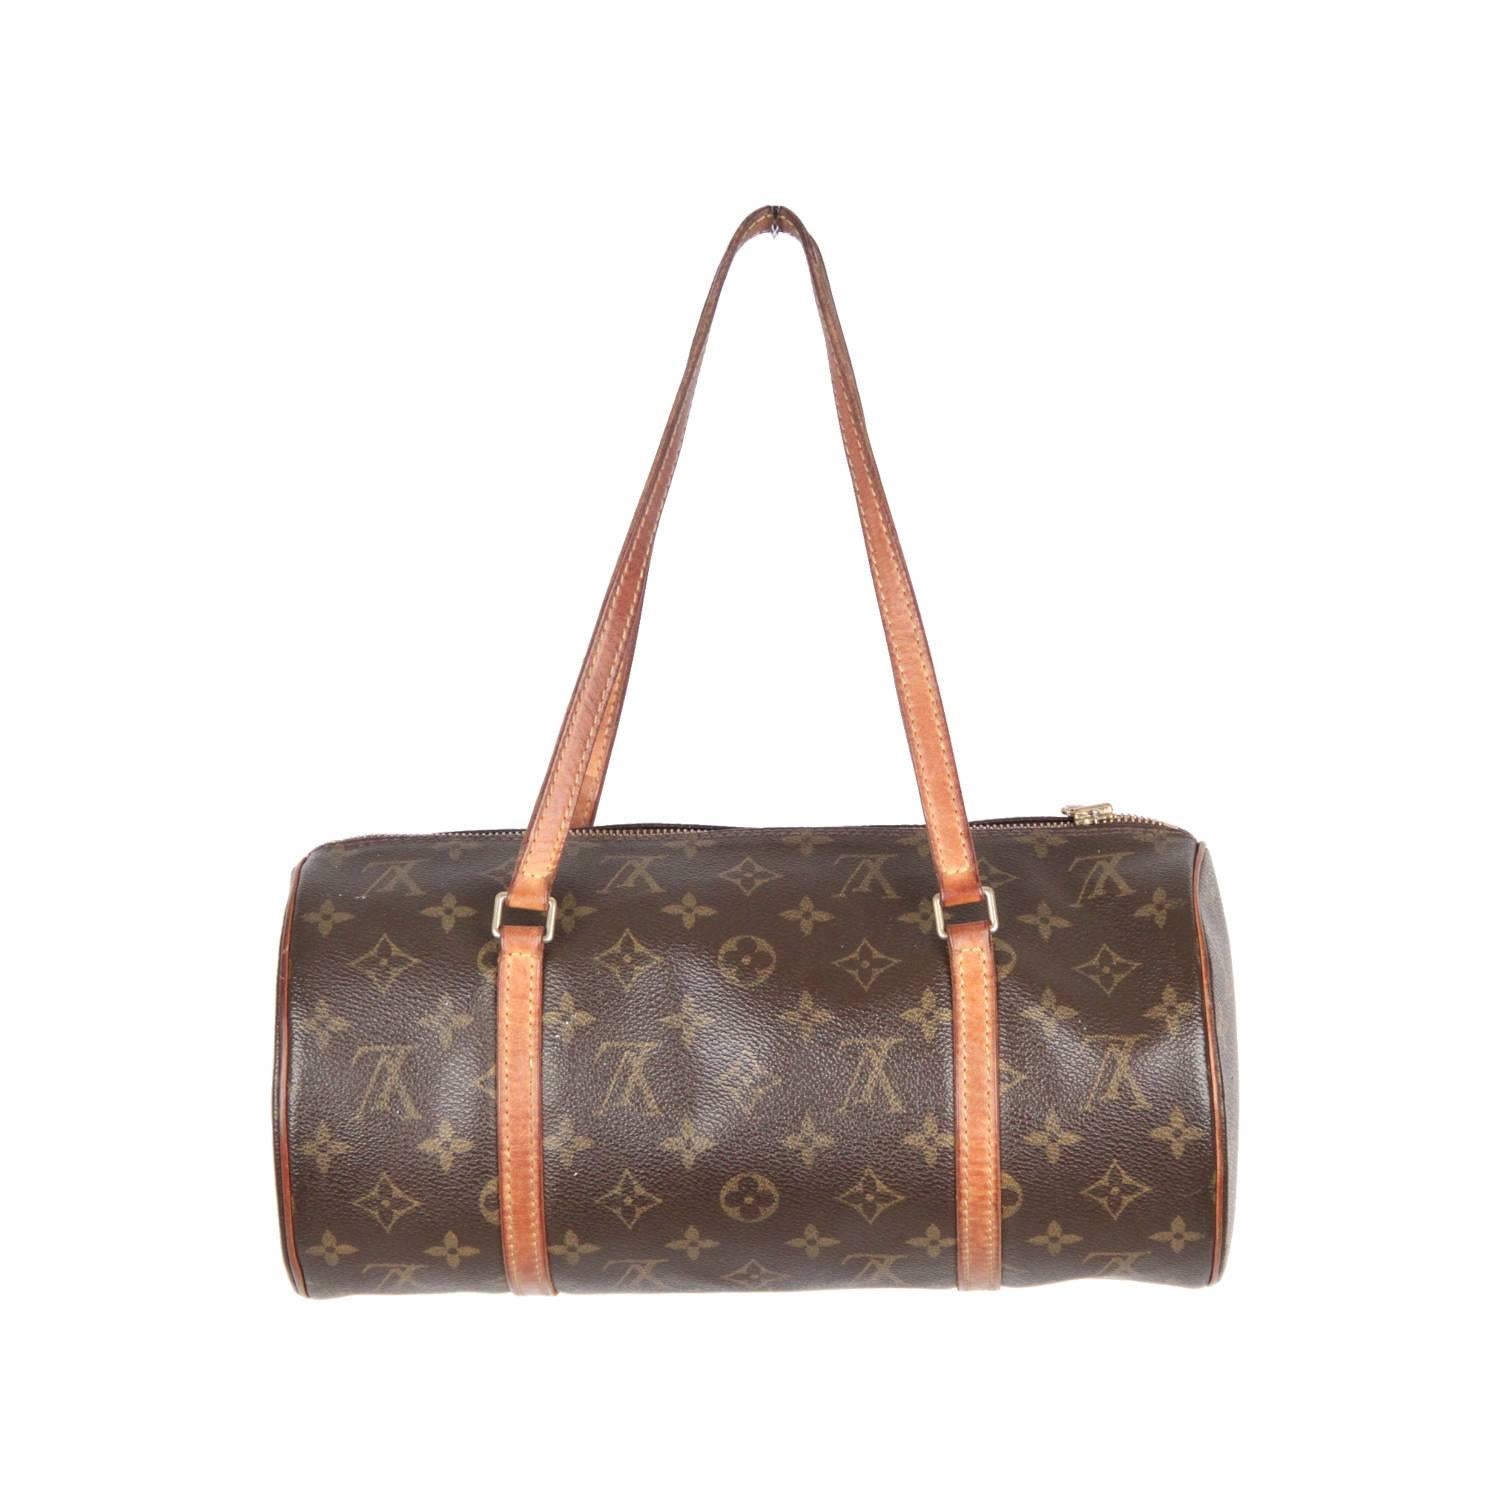 Gorgeous Louis Vuitton 'Papillon' Bag in monogram canvas. The classic rounded shape with two straps is supposed to take the form and spirit of the butterfly ('Papillon' in French). It was originally designed by Henri Vuitton in 1966 and has become